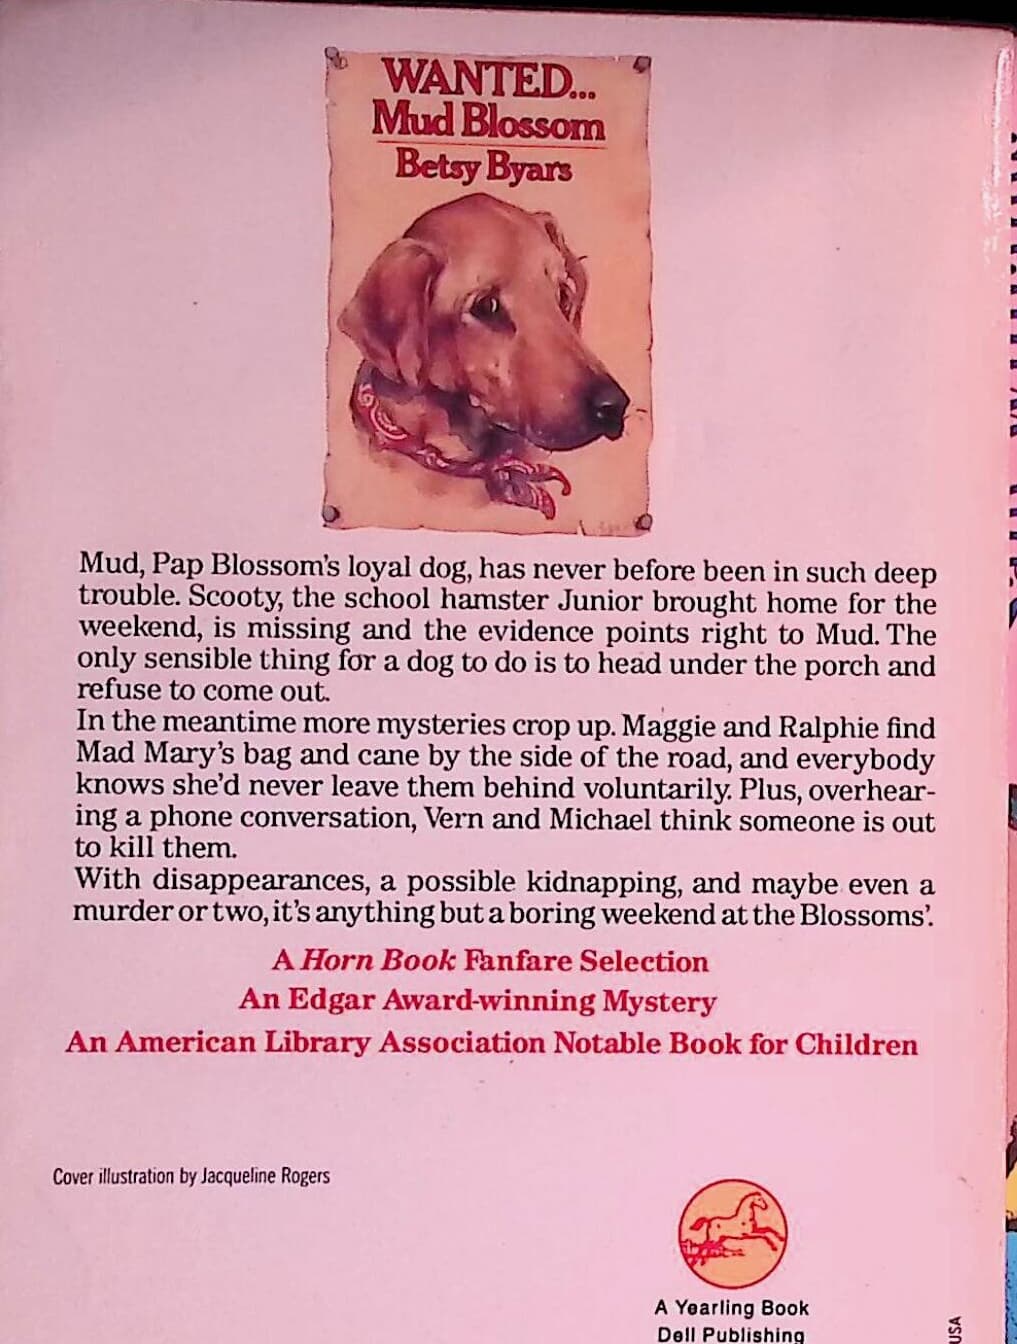 Wanted... Mud Blossom Paperback 